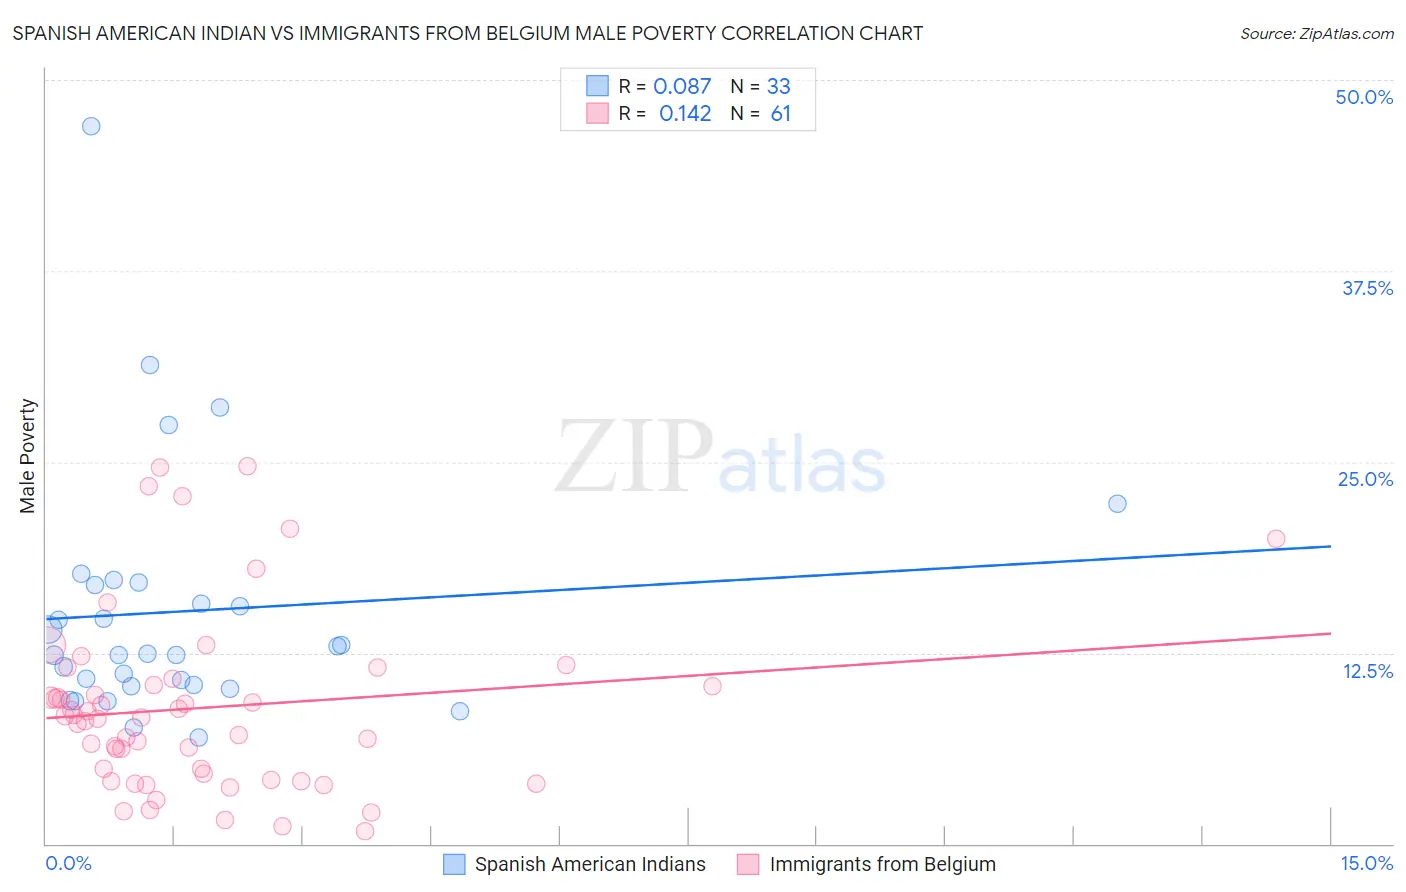 Spanish American Indian vs Immigrants from Belgium Male Poverty